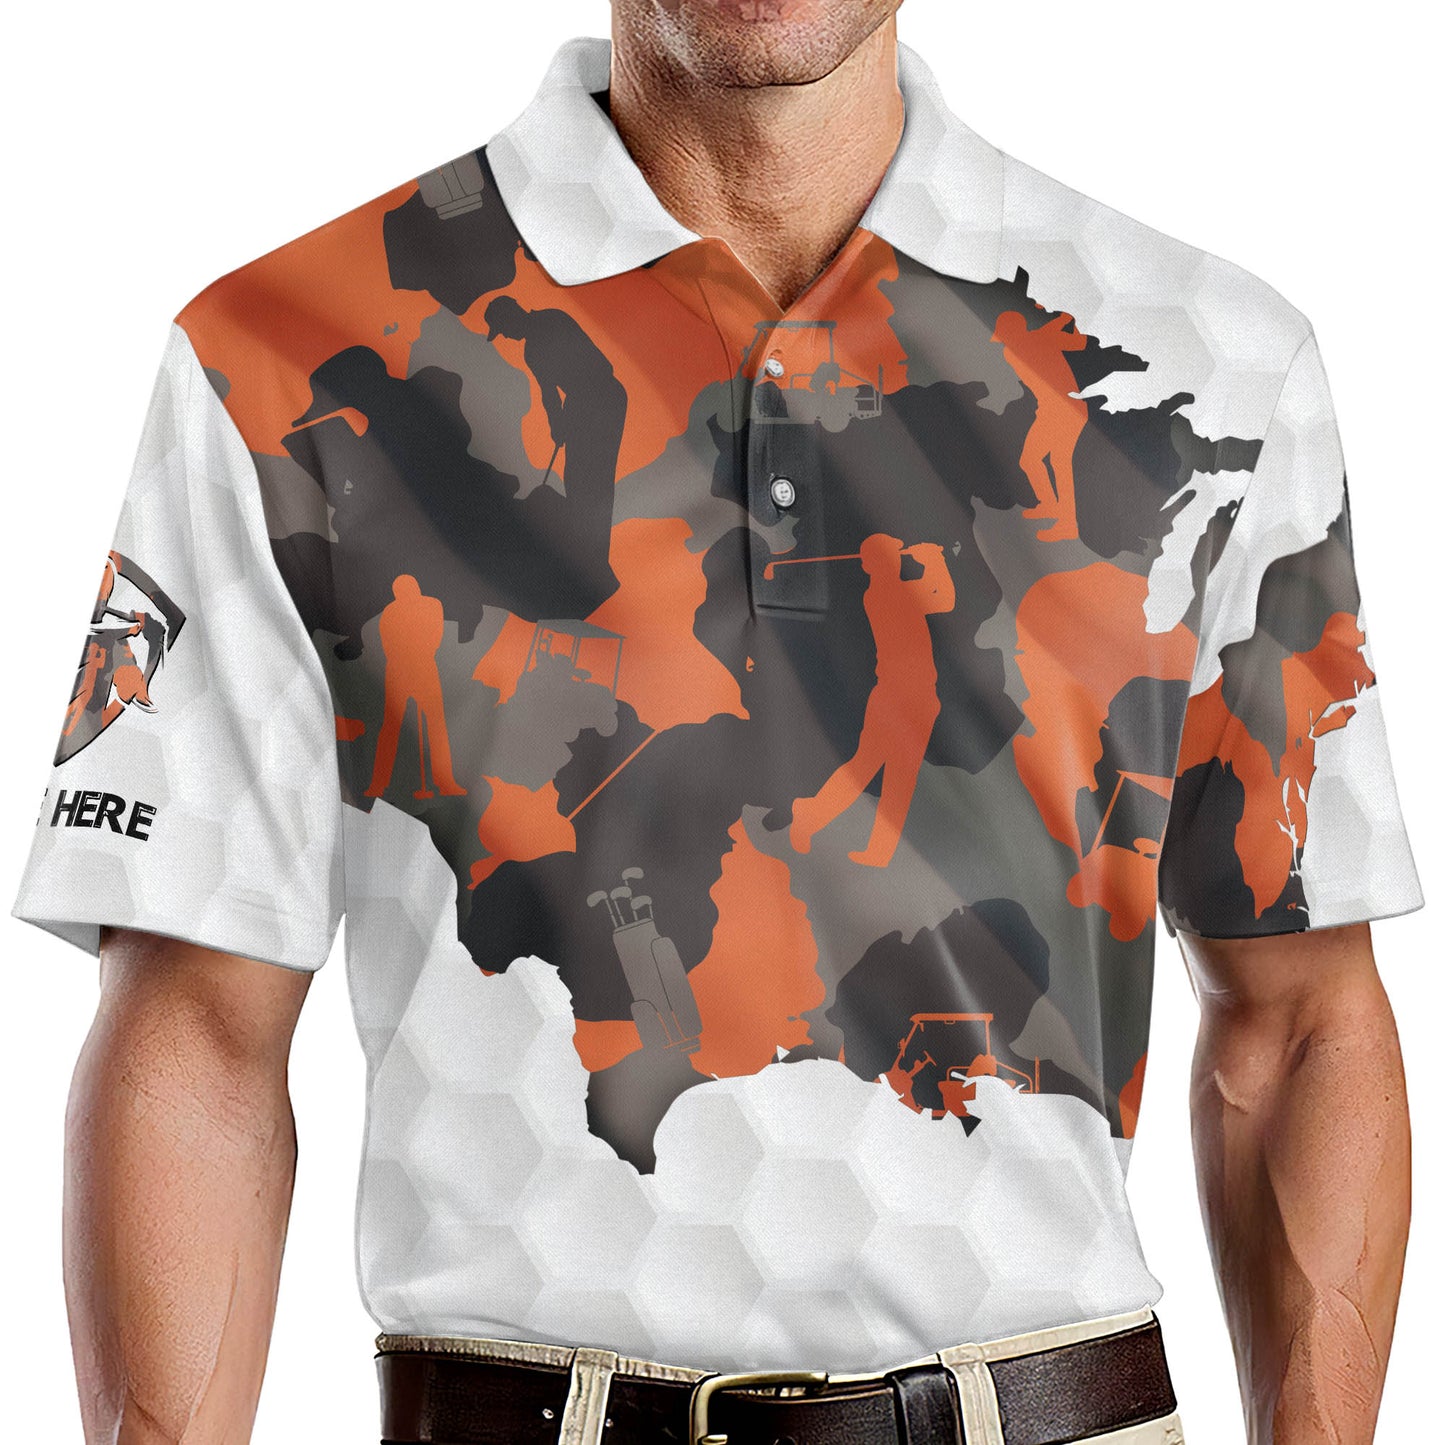 I Need My Daily Dose Of Iron Golf Polo Shirt GM0138